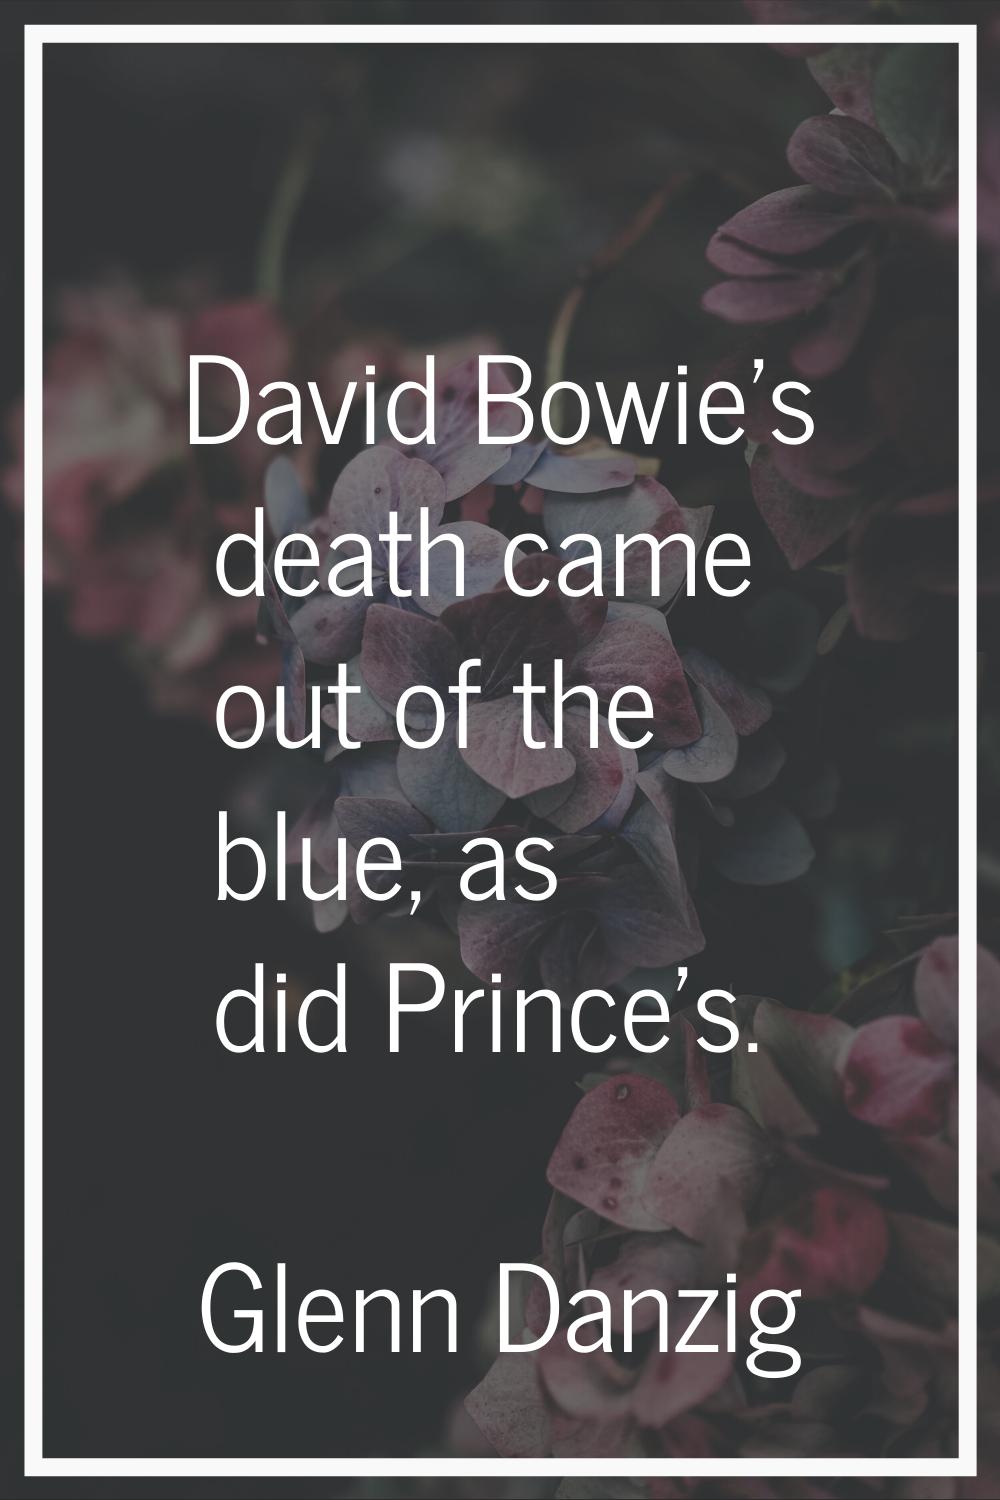 David Bowie's death came out of the blue, as did Prince's.